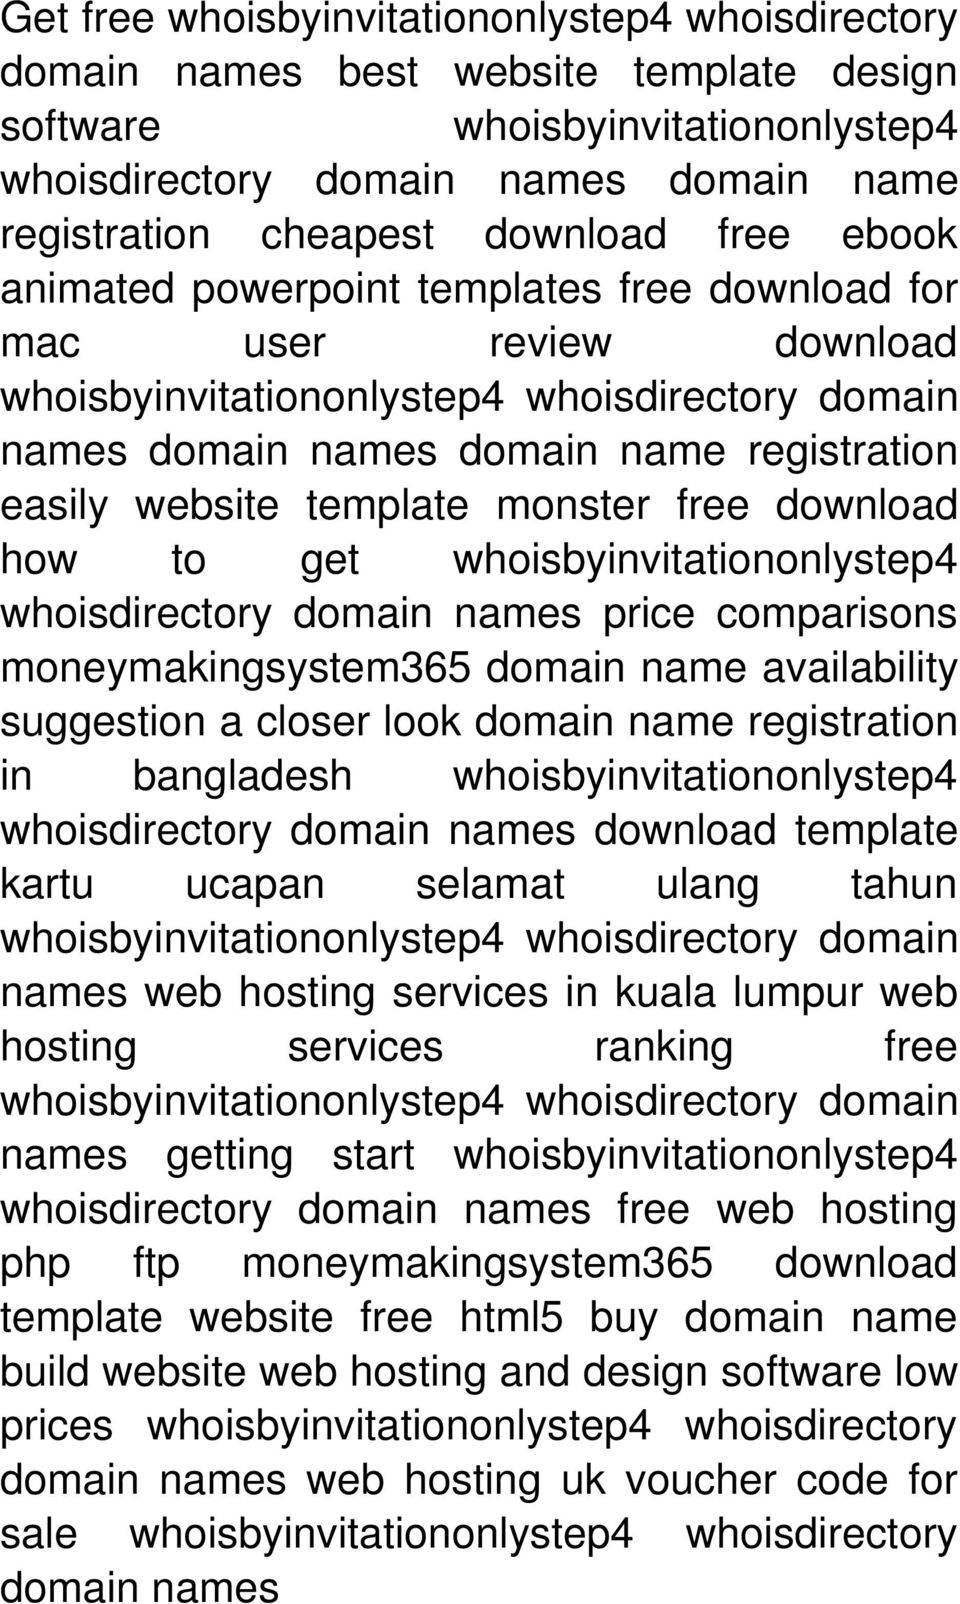 whoisbyinvitationonlystep4 whoisdirectory domain names price comparisons moneymakingsystem365 domain name availability suggestion a closer look domain name registration in bangladesh